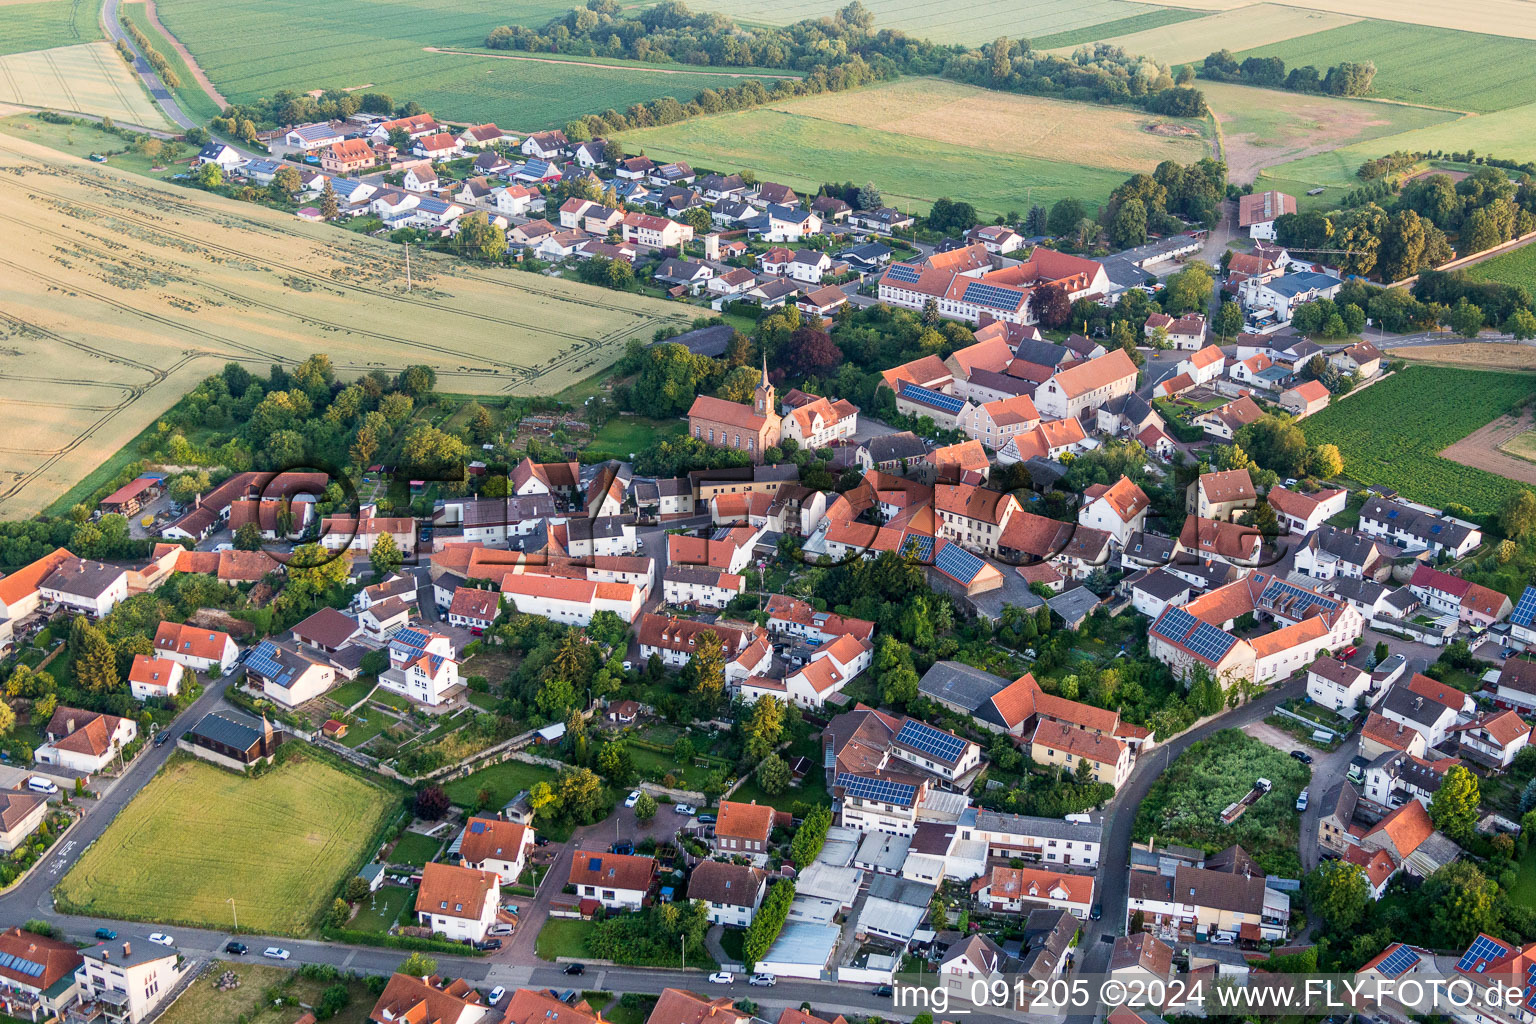 Aerial view of Village - view on the edge of agricultural fields and farmland in Lautersheim in the state Rhineland-Palatinate, Germany